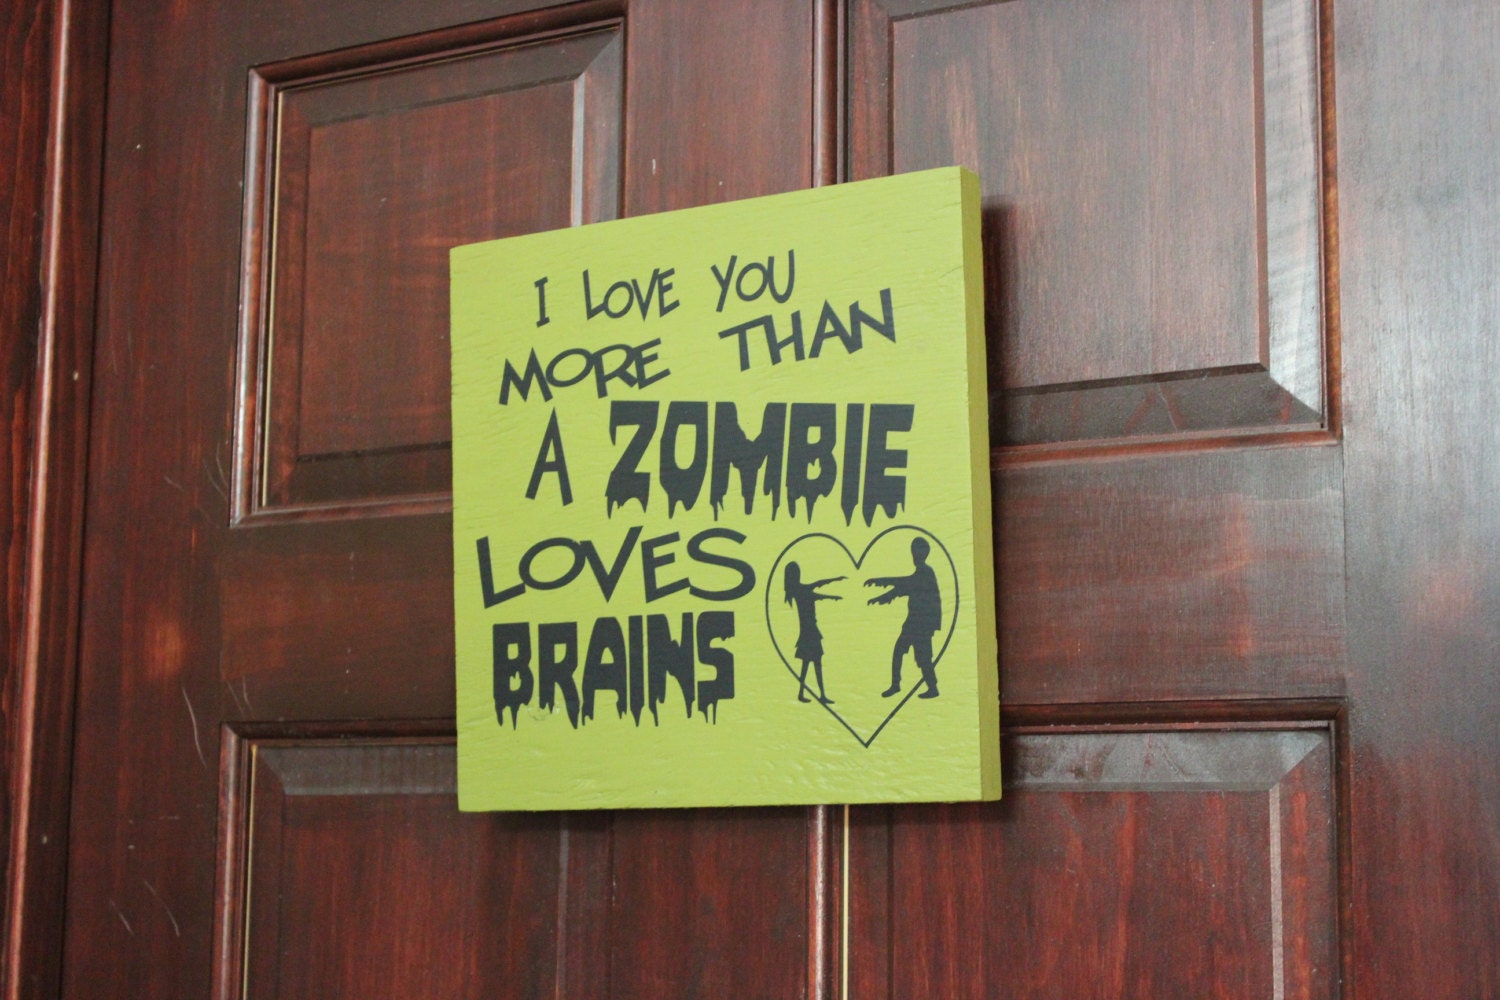 I Love You More Than A Zombie Loves Brains - rachaelwindemuller